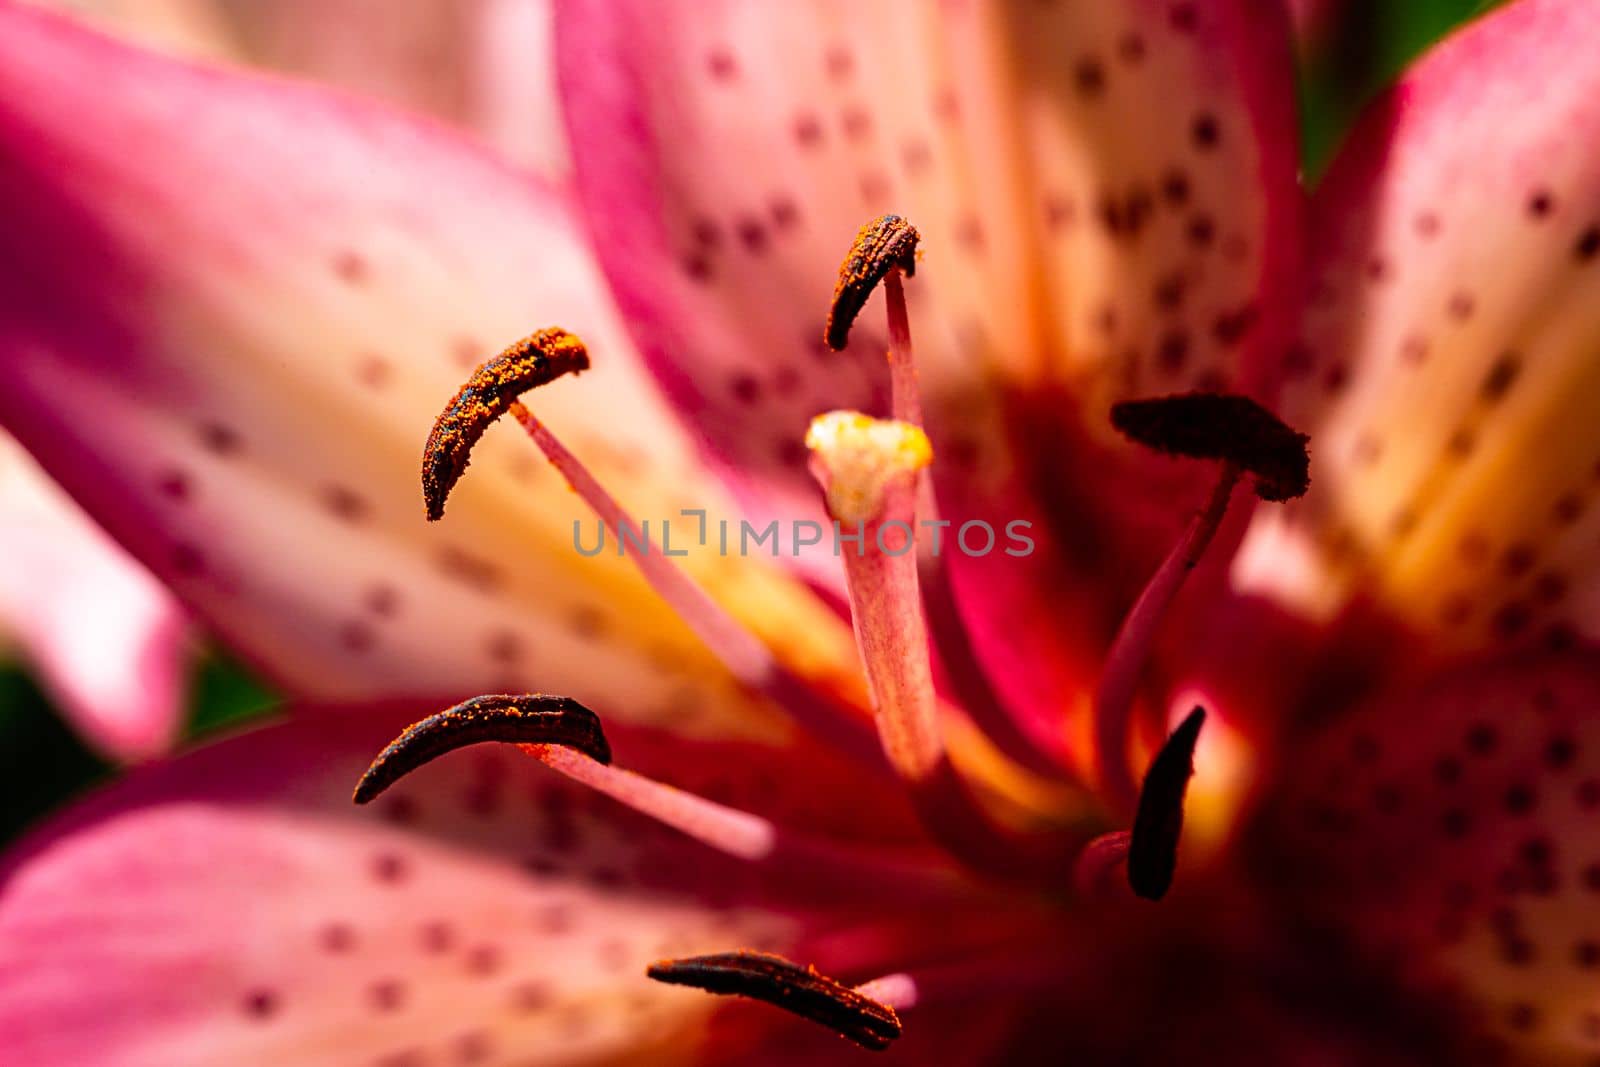 Inside a lily flower by mypstudio